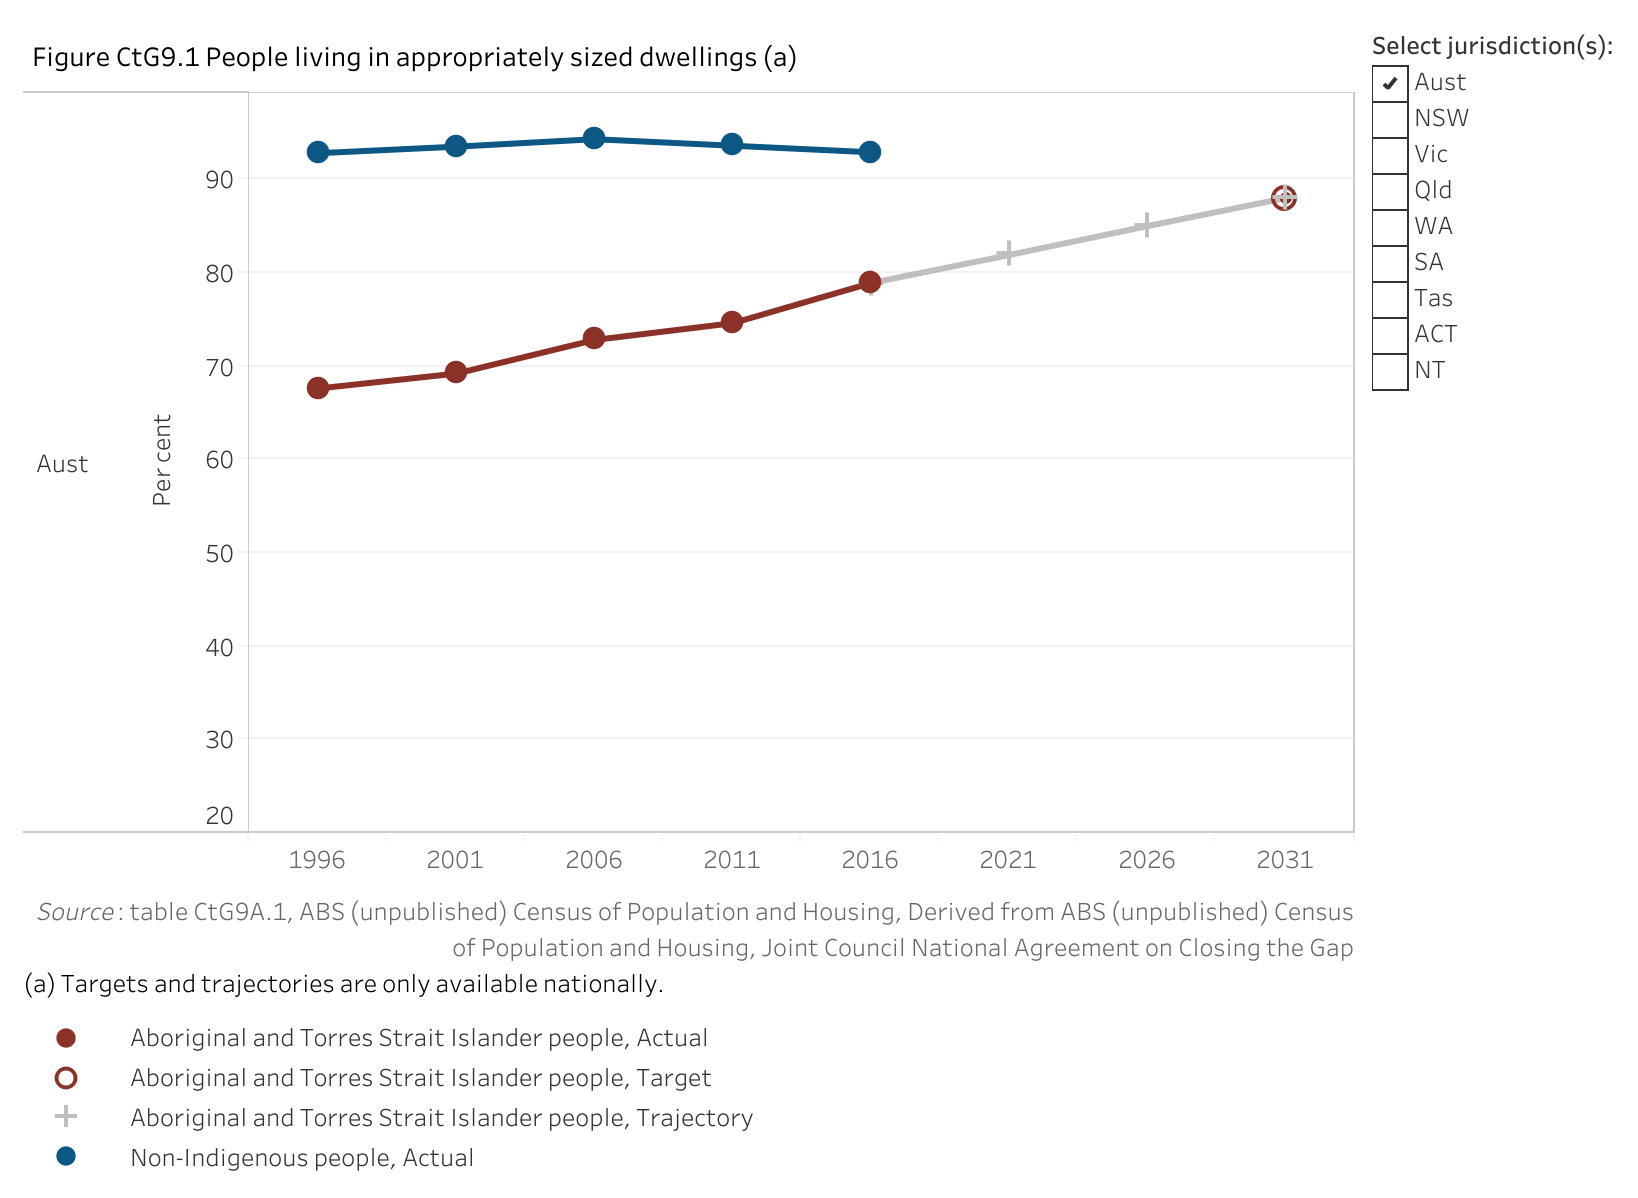 Figure CtG9.1. Line chart showing the proportion of Aboriginal and Torres Strait Islander people and non-Indigenous people living in appropriately sized (not overcrowded) housing. The aim under Closing the Gap is to increase the proportion for Aboriginal and Torres Strait Islander people from a 2016 baseline value of 78.9 per cent to a target value of 88 per cent by 2031.